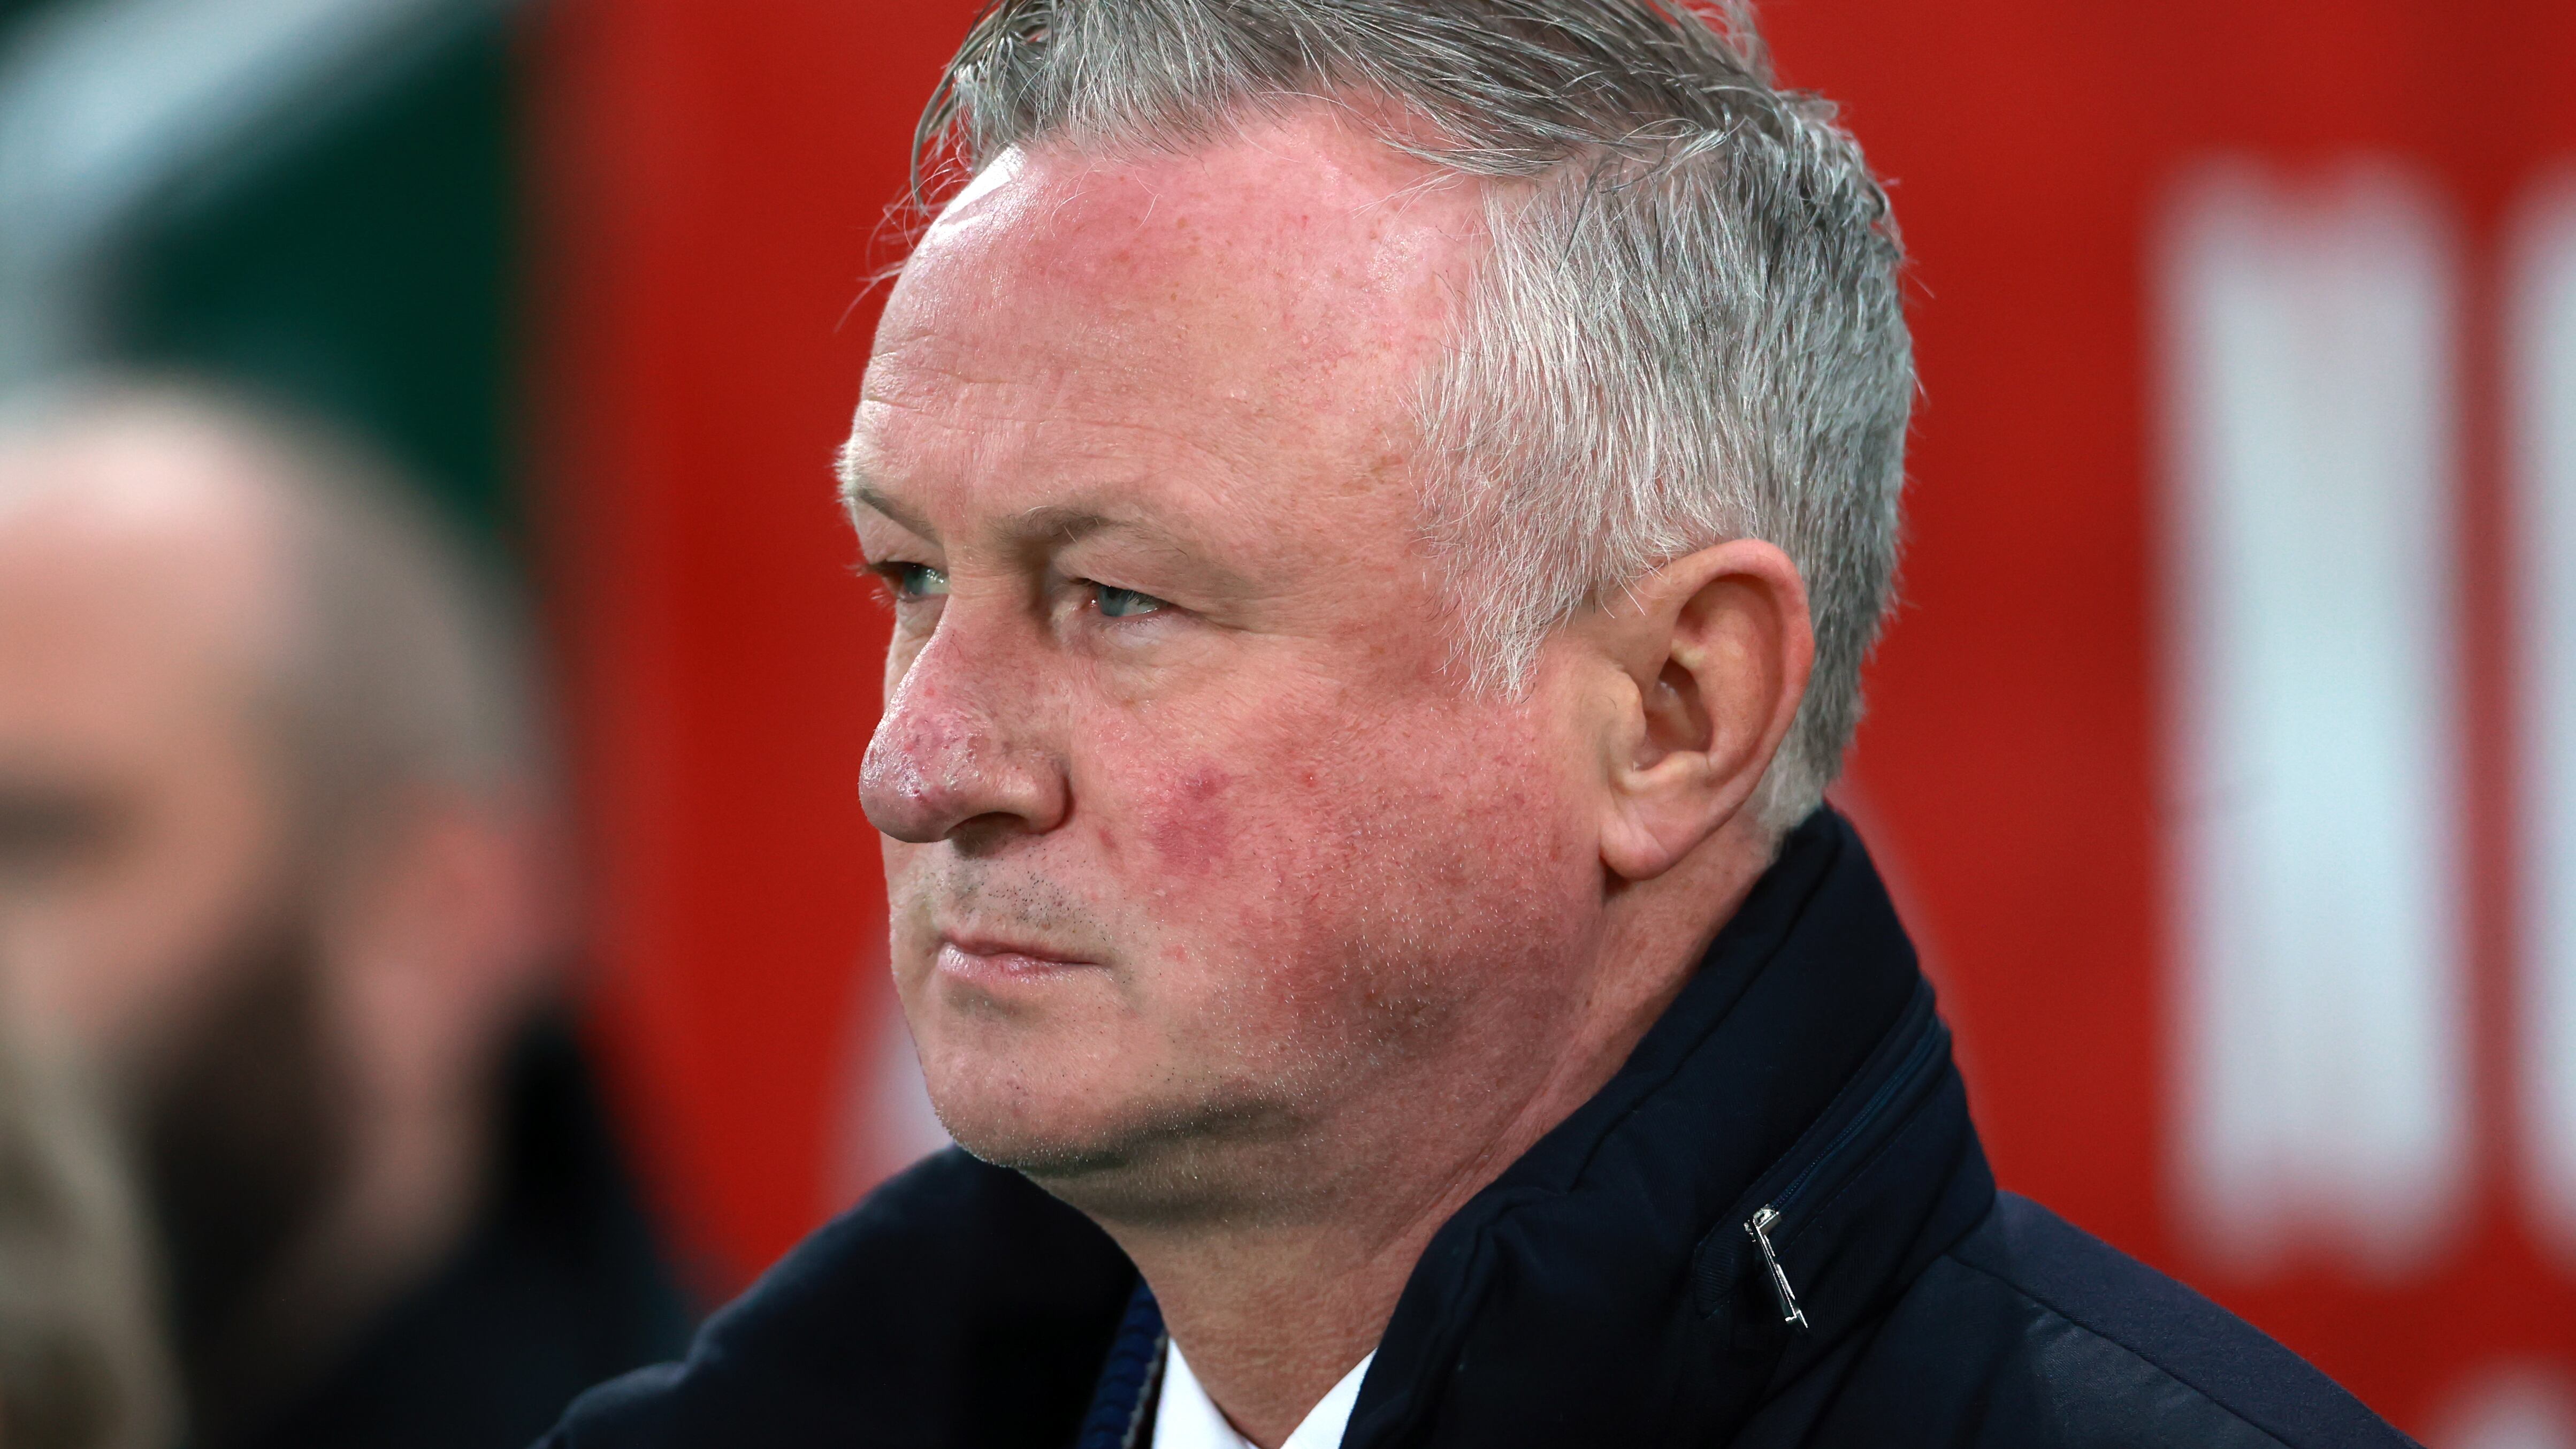 Northern Ireland boss Michael O’Neill will see Tuesday’s match against Andorra as the time to bounce back from defeat against Spain